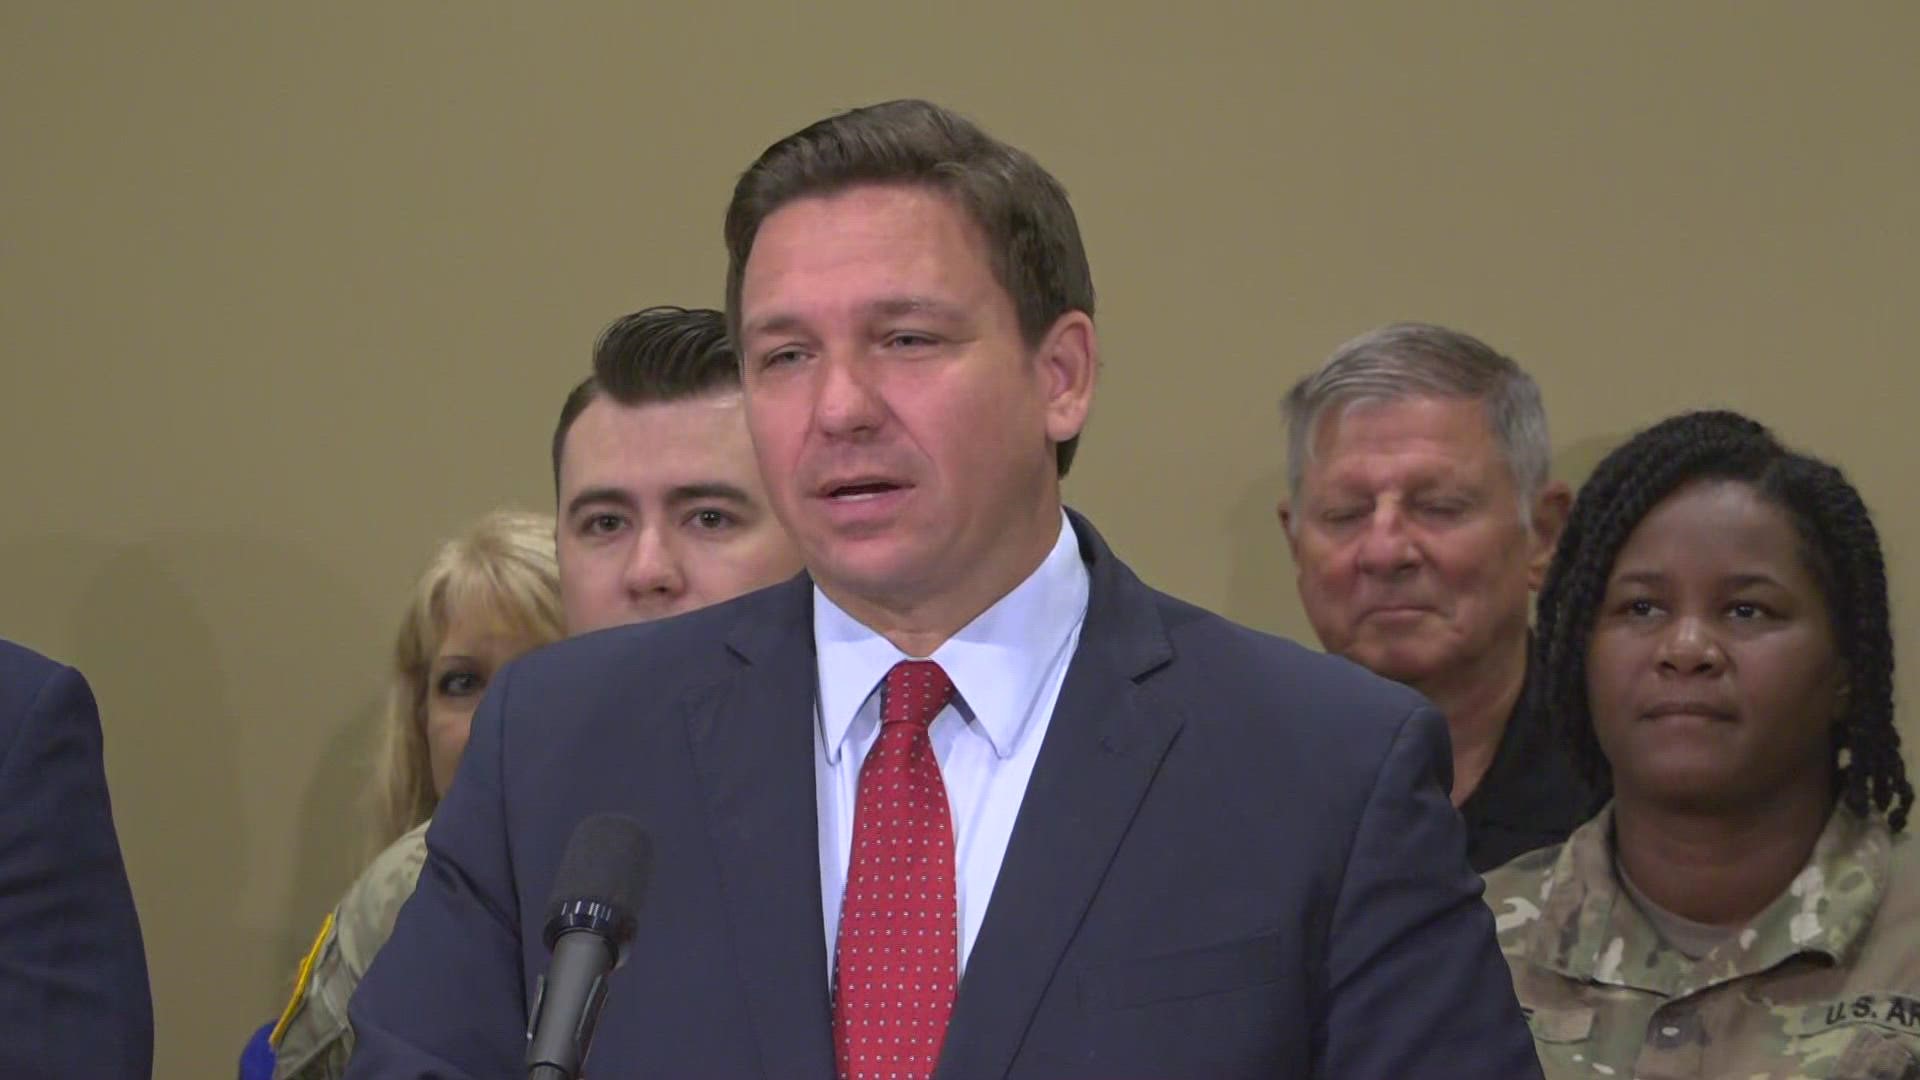 The money will come from the Department of Economic Opportunity and will largely impact military bases in northeast and northwest Florida, DeSantis said.